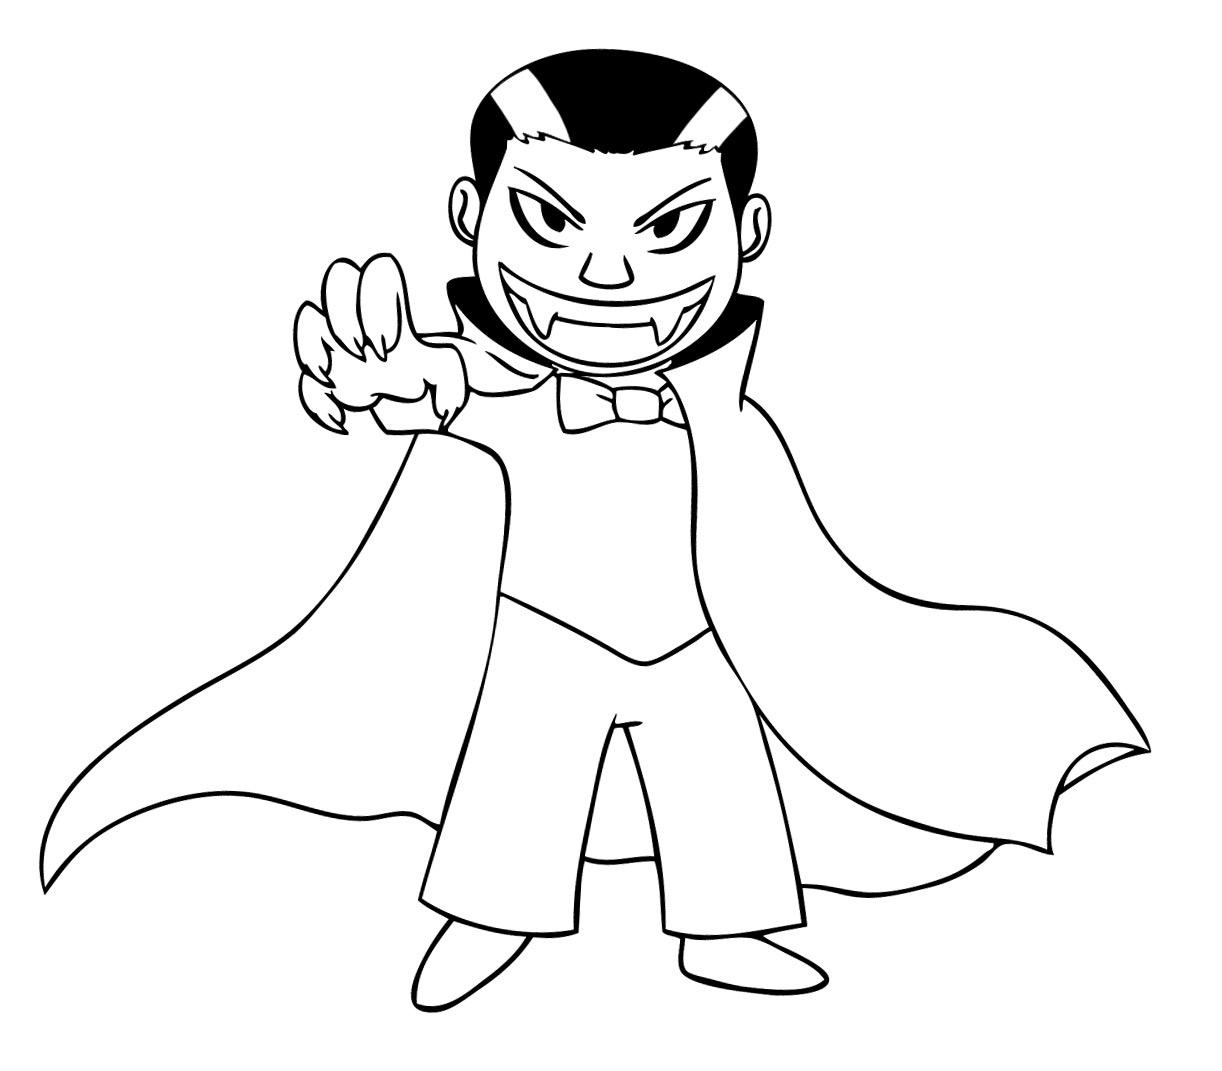  Wicked Dracula Coloring Pages | Print Coloring Pages